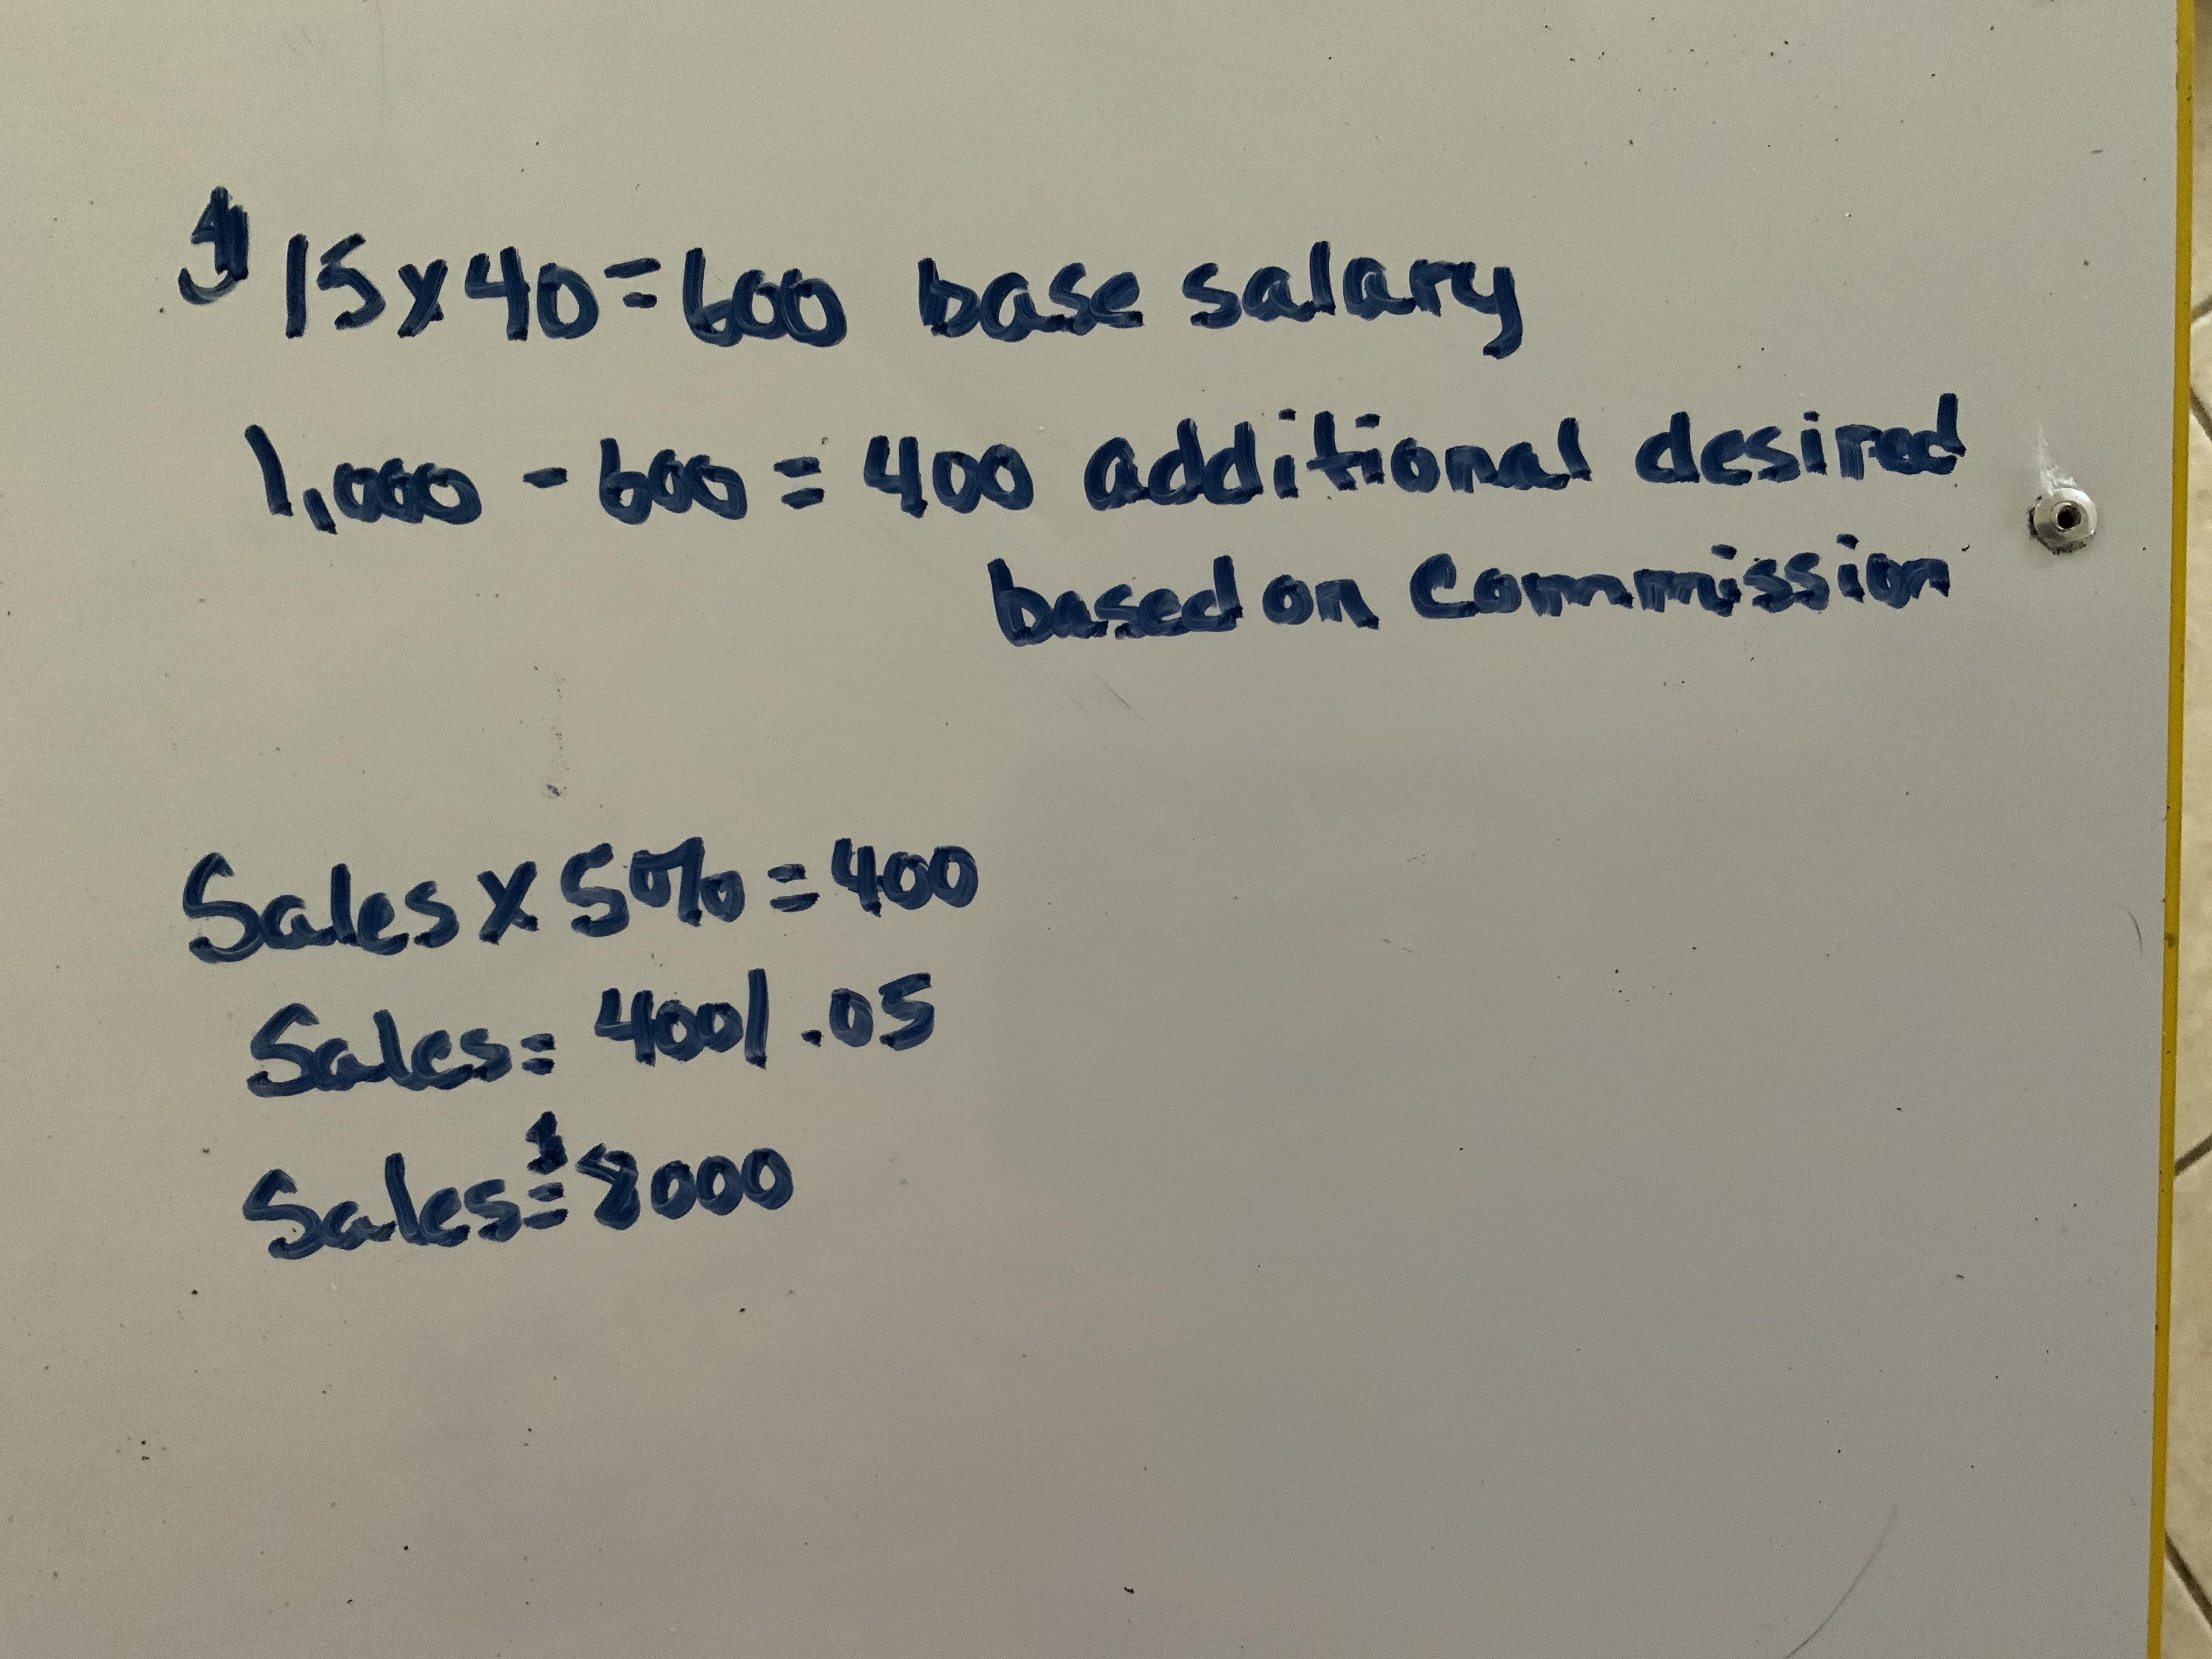 Jack Is Selling Used Computers. He Is Paid $15/h Plus A 5% Commission On Sales. What Dollar Amount Of